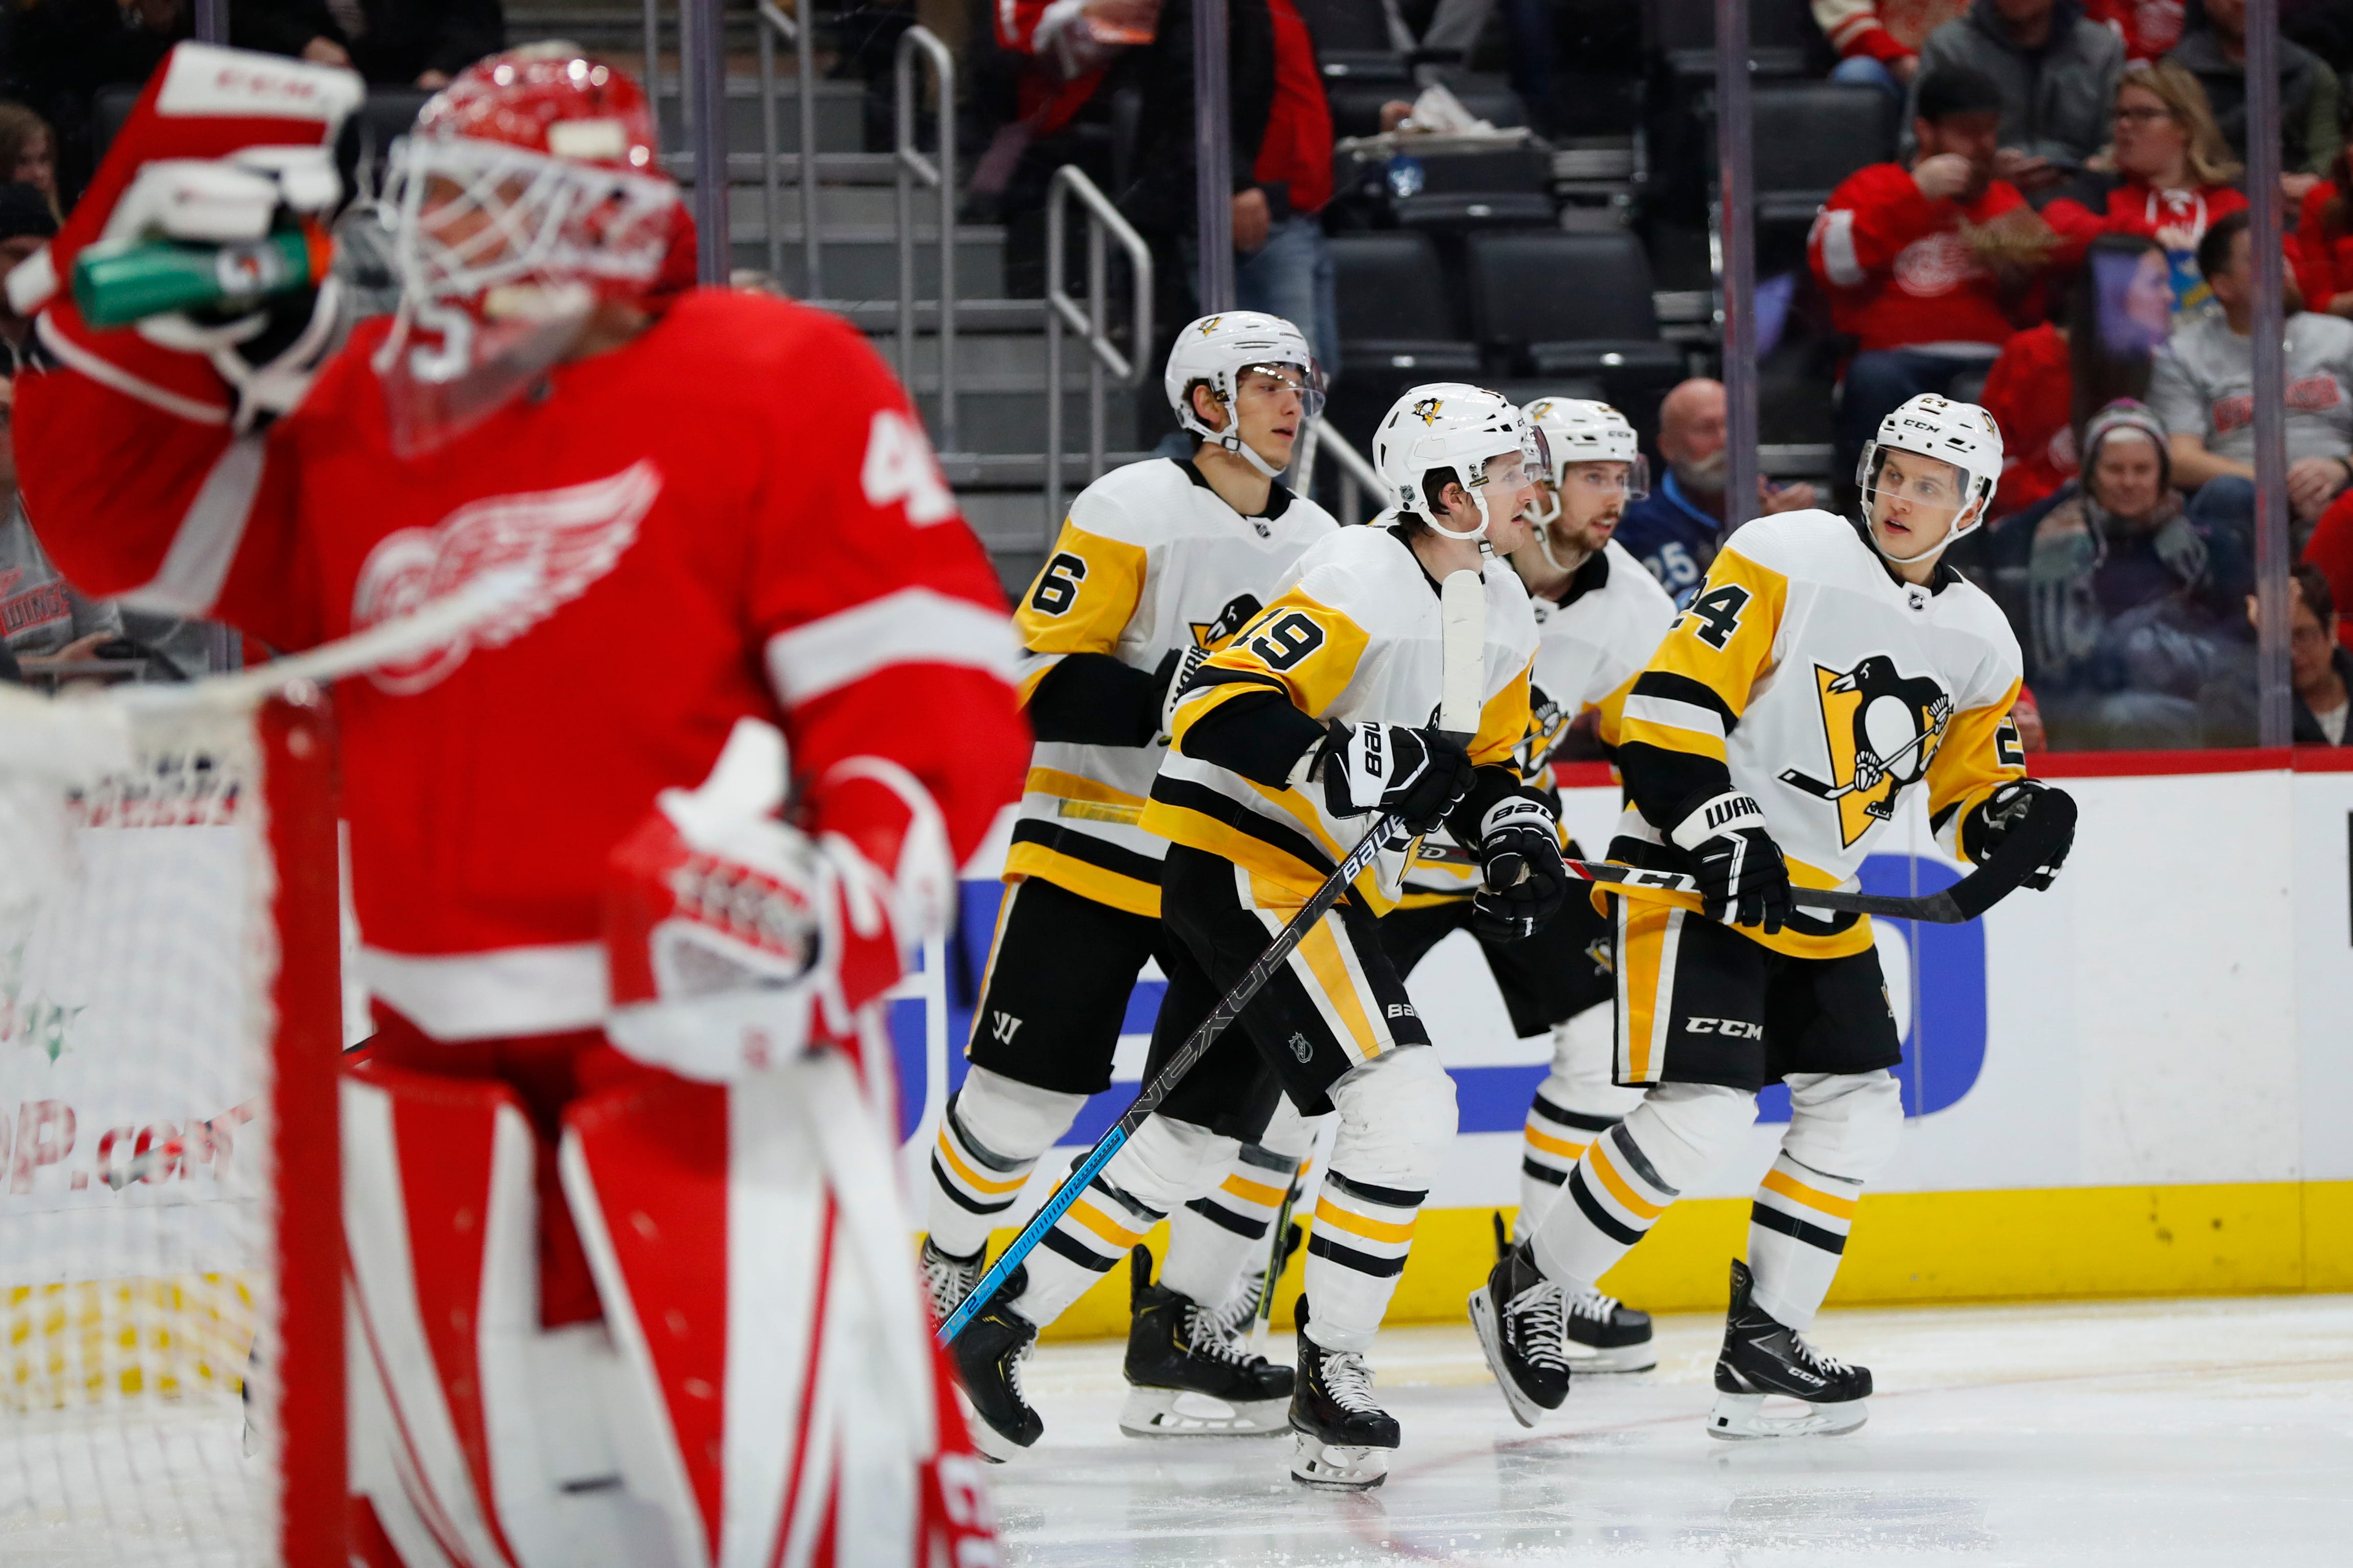 Pittsburgh Penguins center Dominik Kahun, right, celebrates his goal with teammates against the Detroit Red Wings in the third period.